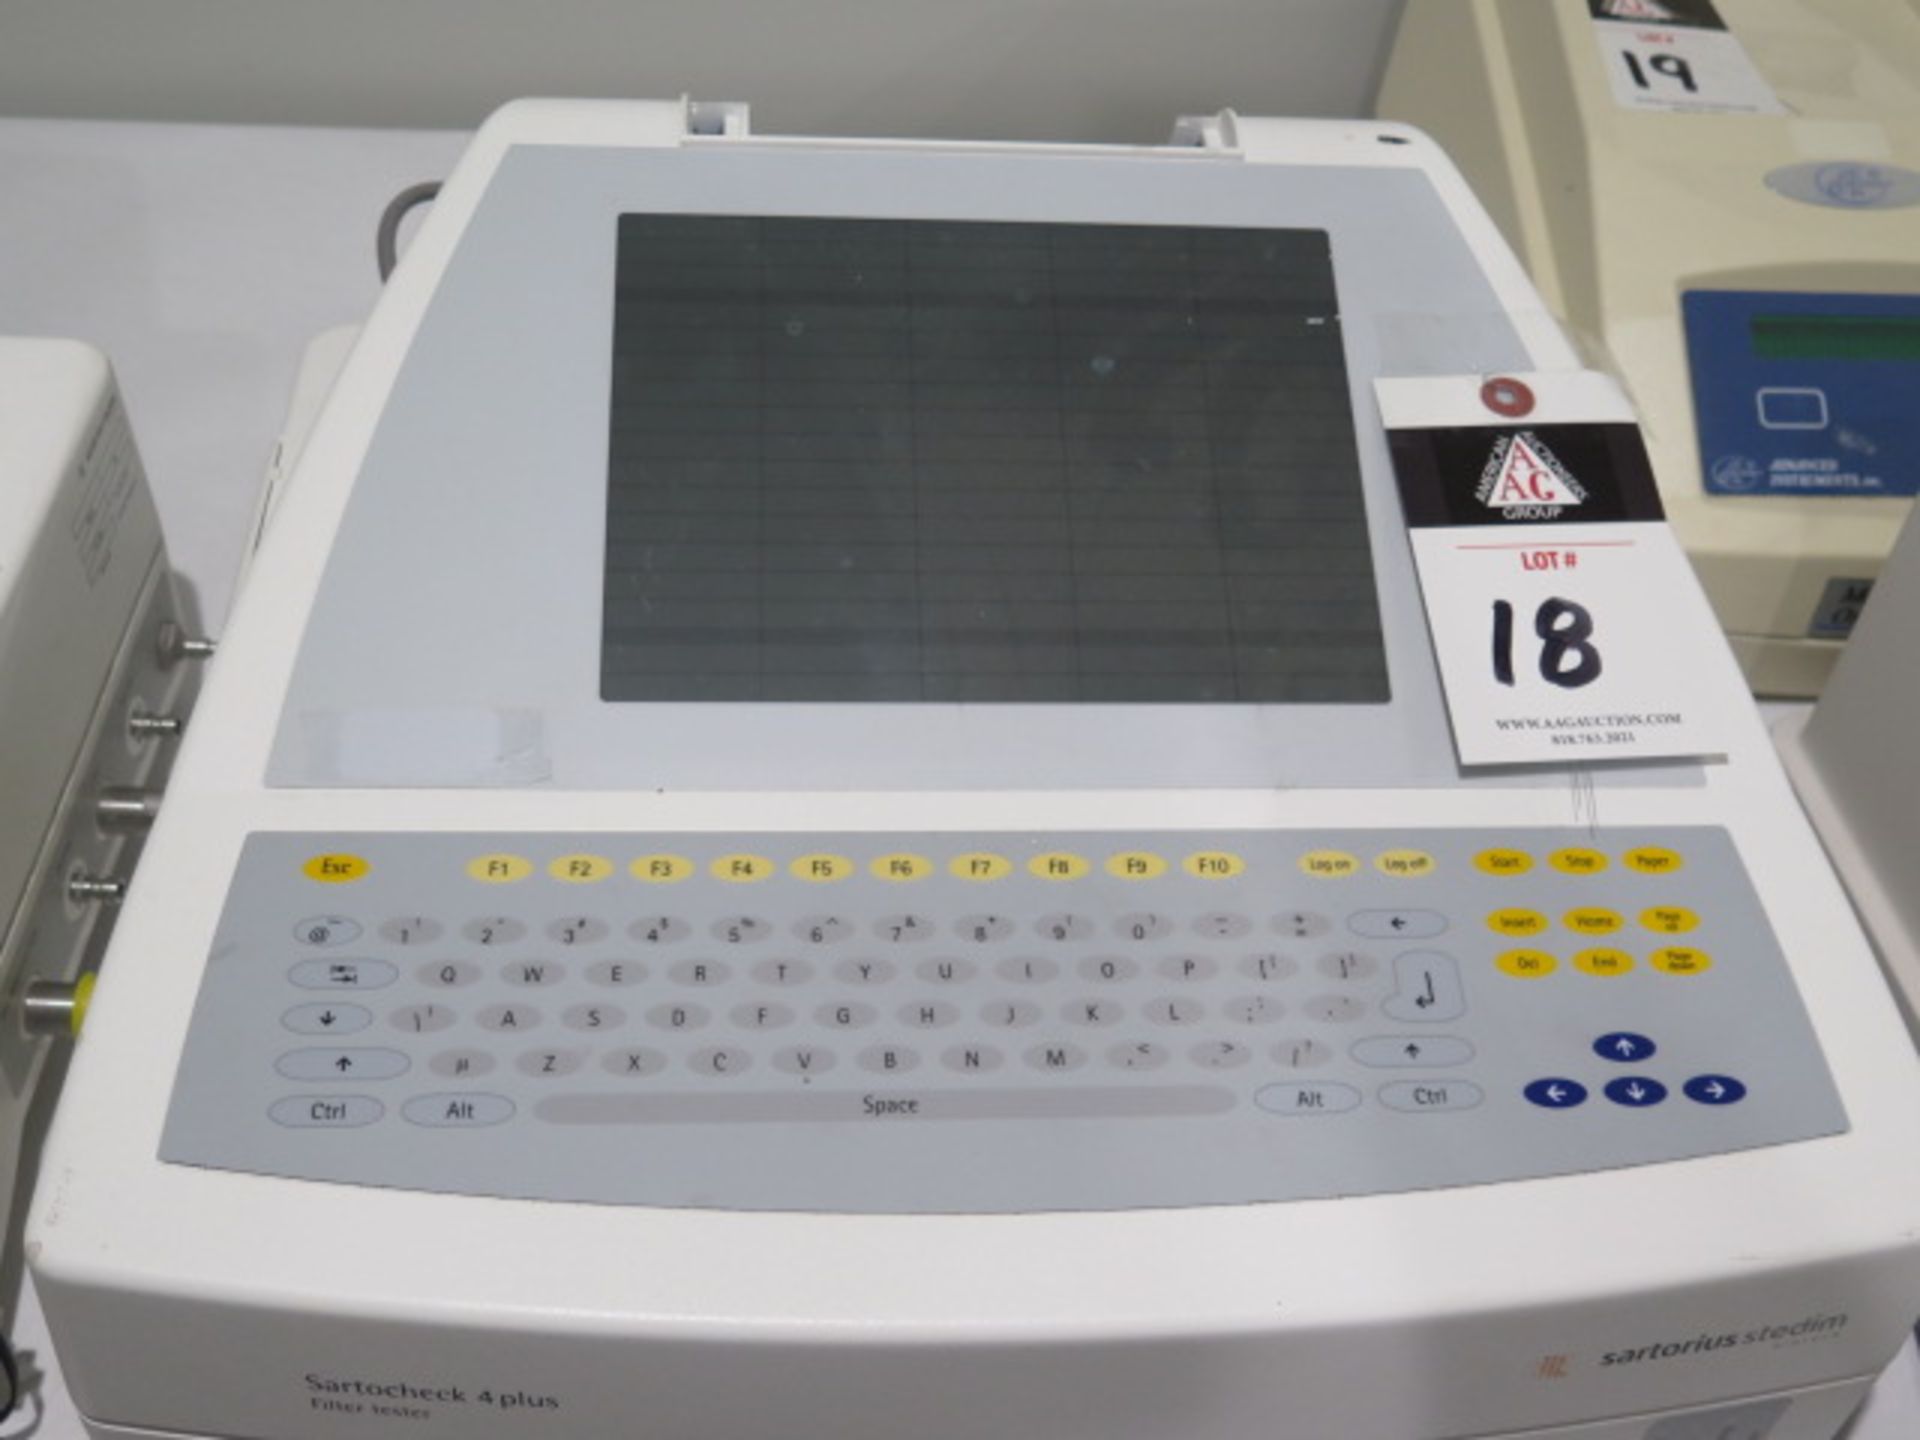 Sartorius Stedim Biotec Sartocheck 4plus Filter Tester (FOR PARTS) (SOLD AS-IS - NO WARRANTY) - Image 2 of 8